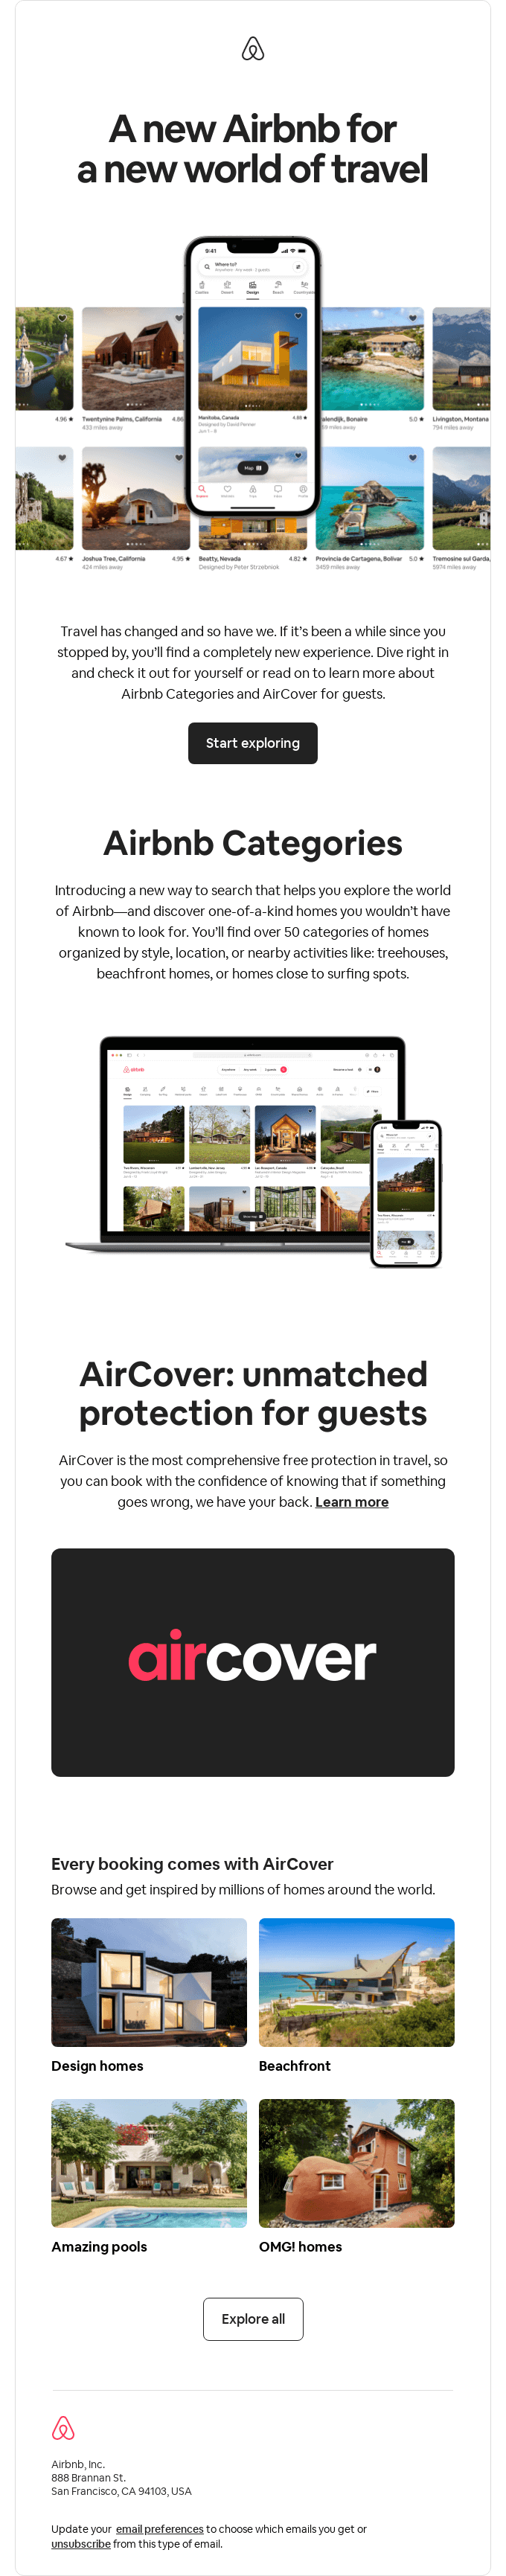 email from Airbnb